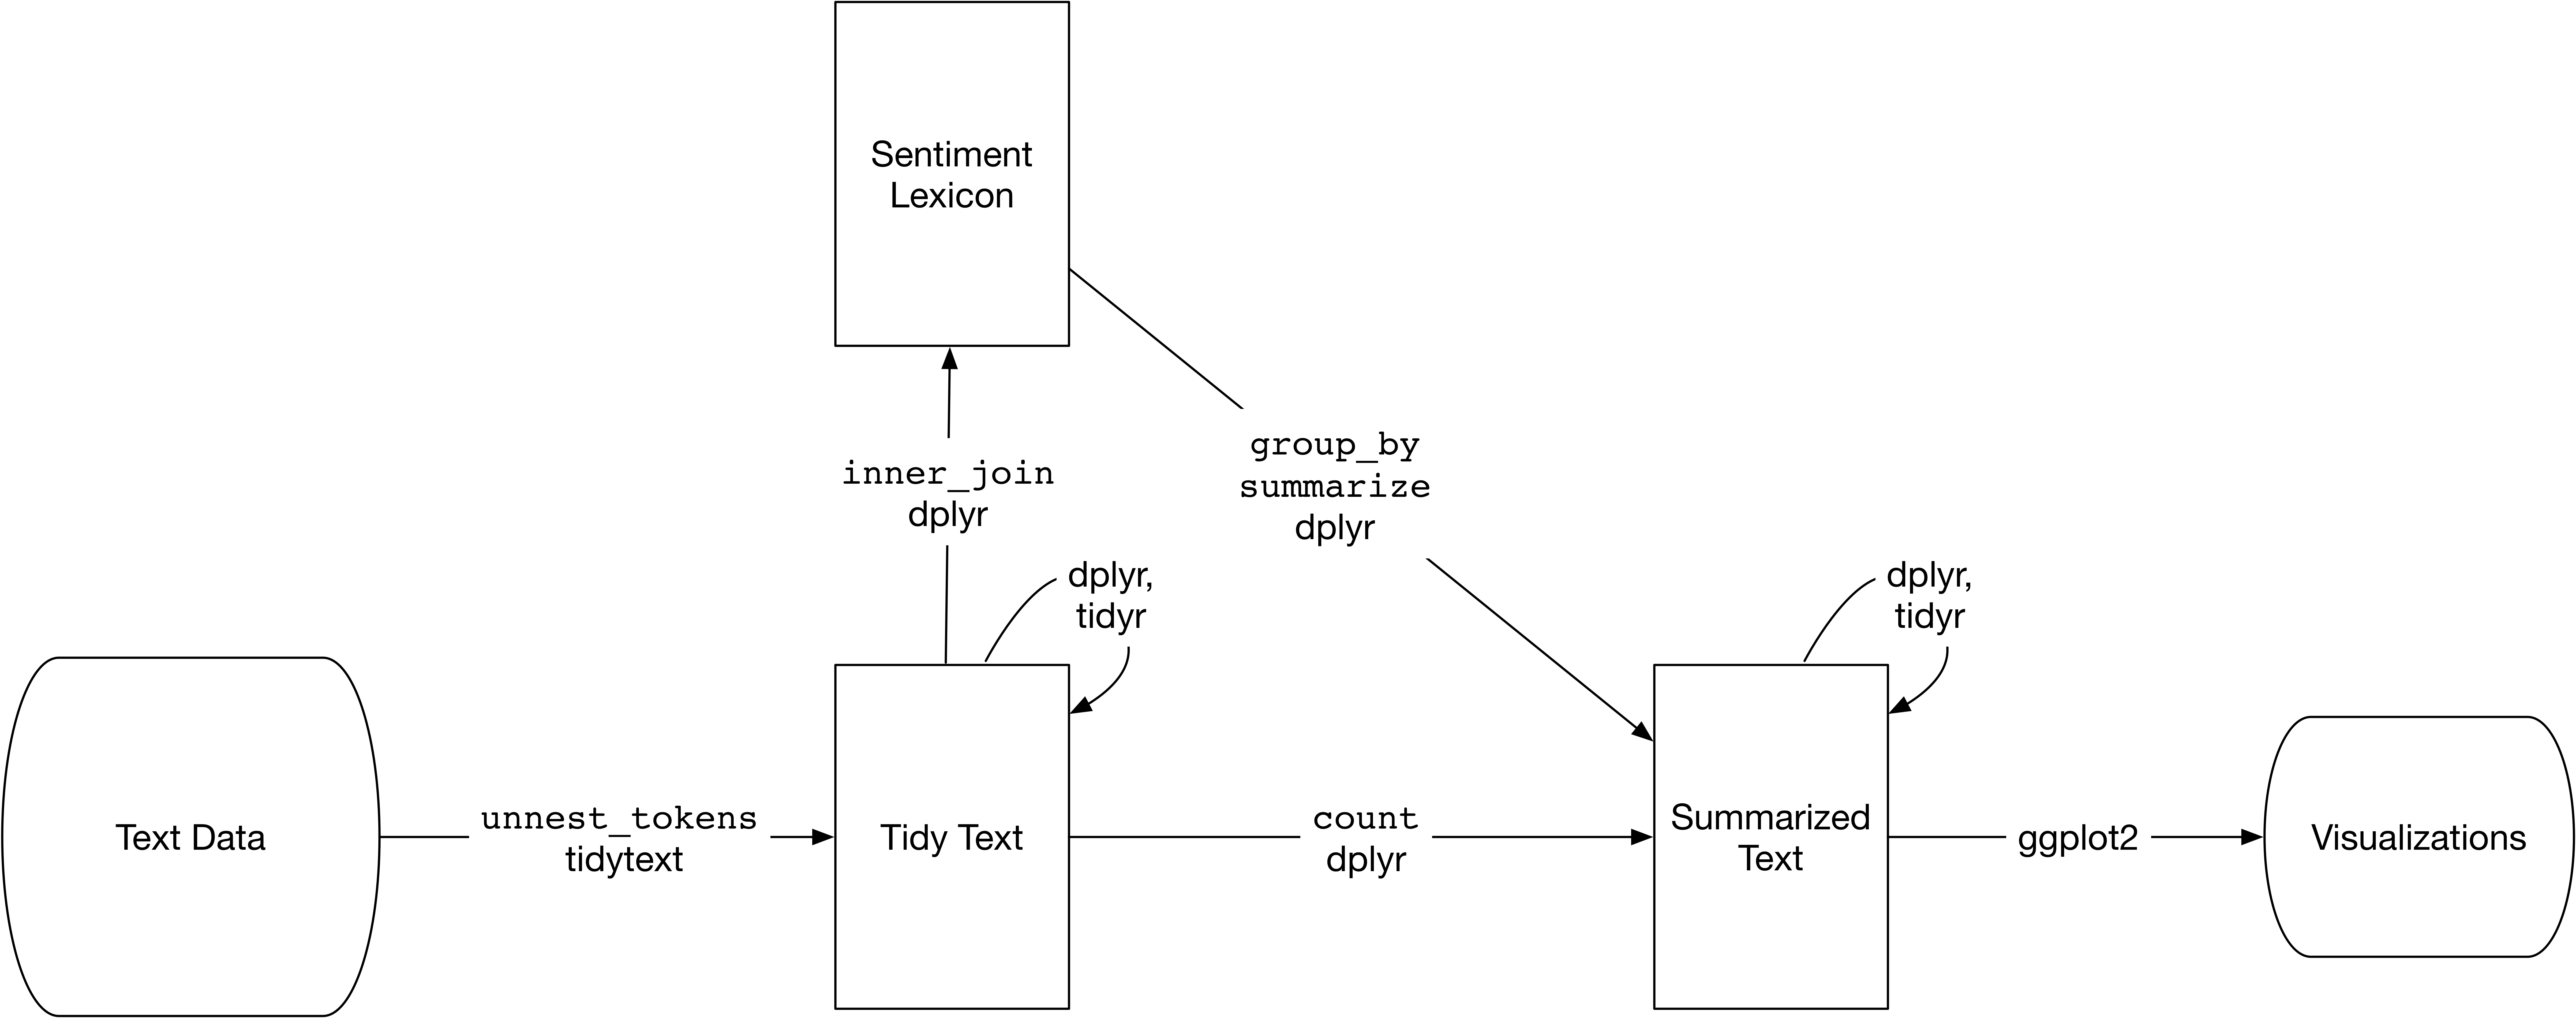 Workflow for sentiment analysis using tidy principles.